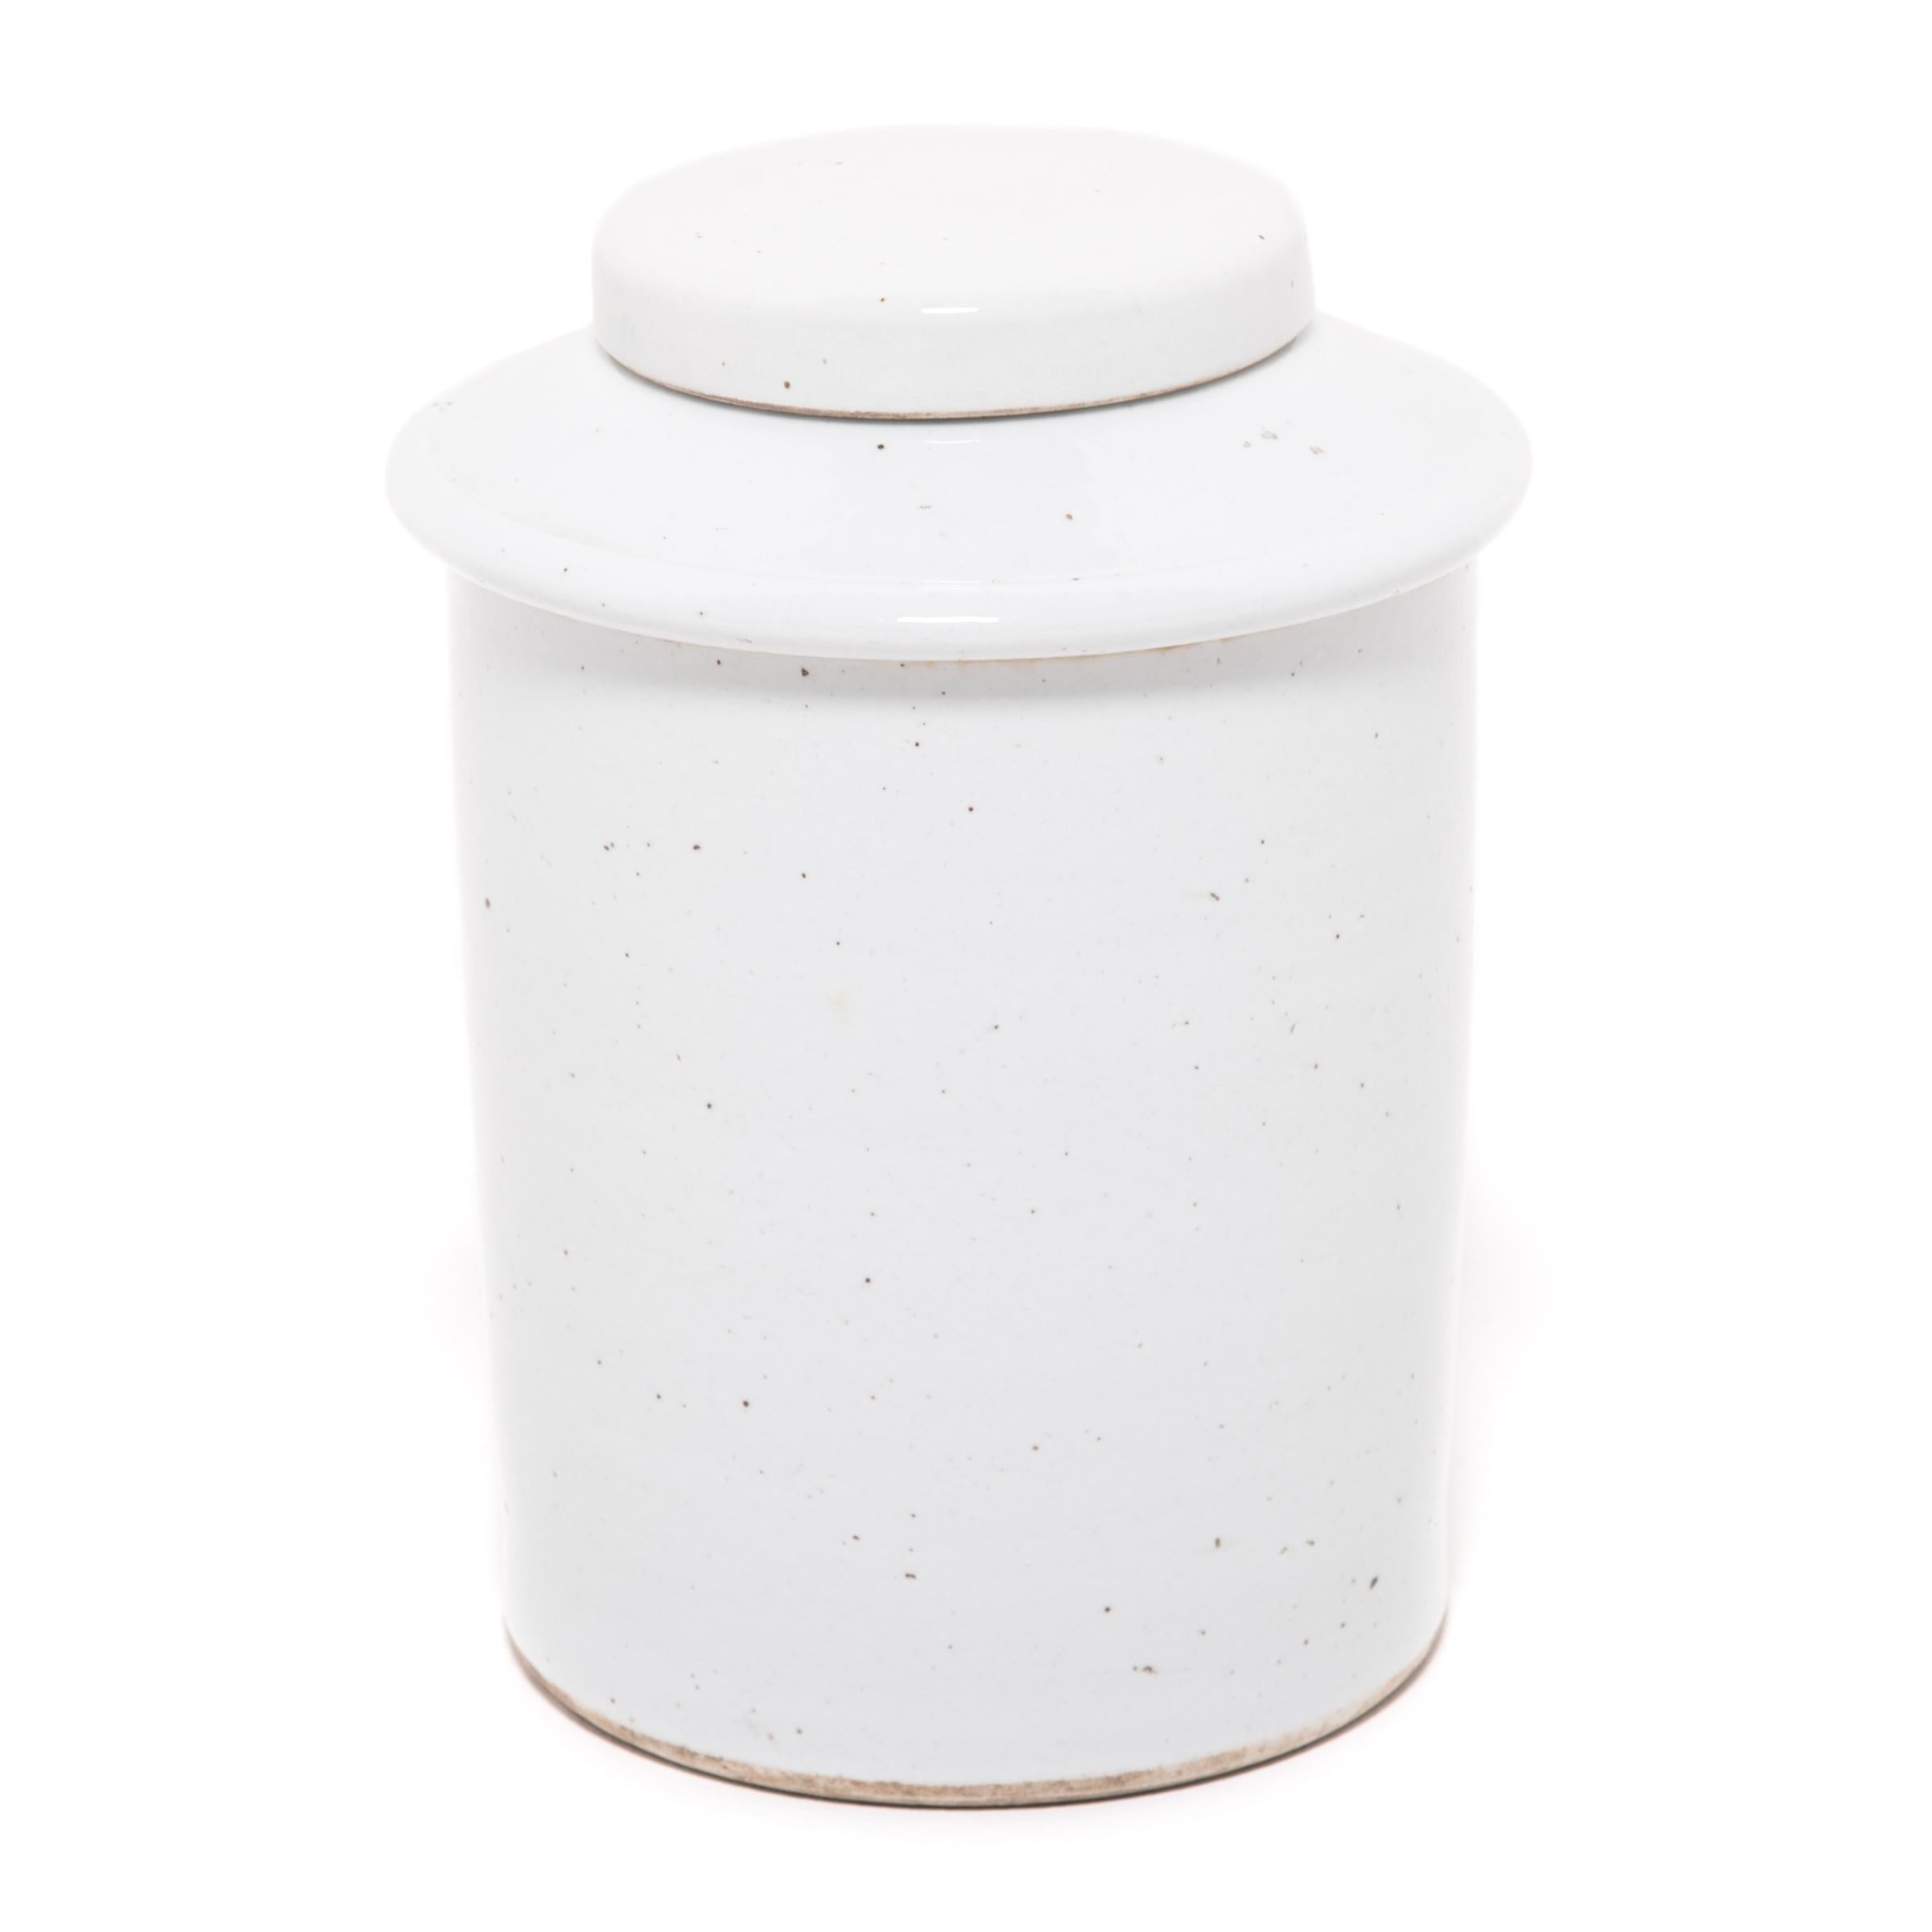 Rendered in a striking cool white glaze, this contemporary porcelain jar offers a modern take on a classic form. Lidded jars like these were used in tea shops in China, where tea drinking was a symbol of taste and upper-class refinement.

Additional